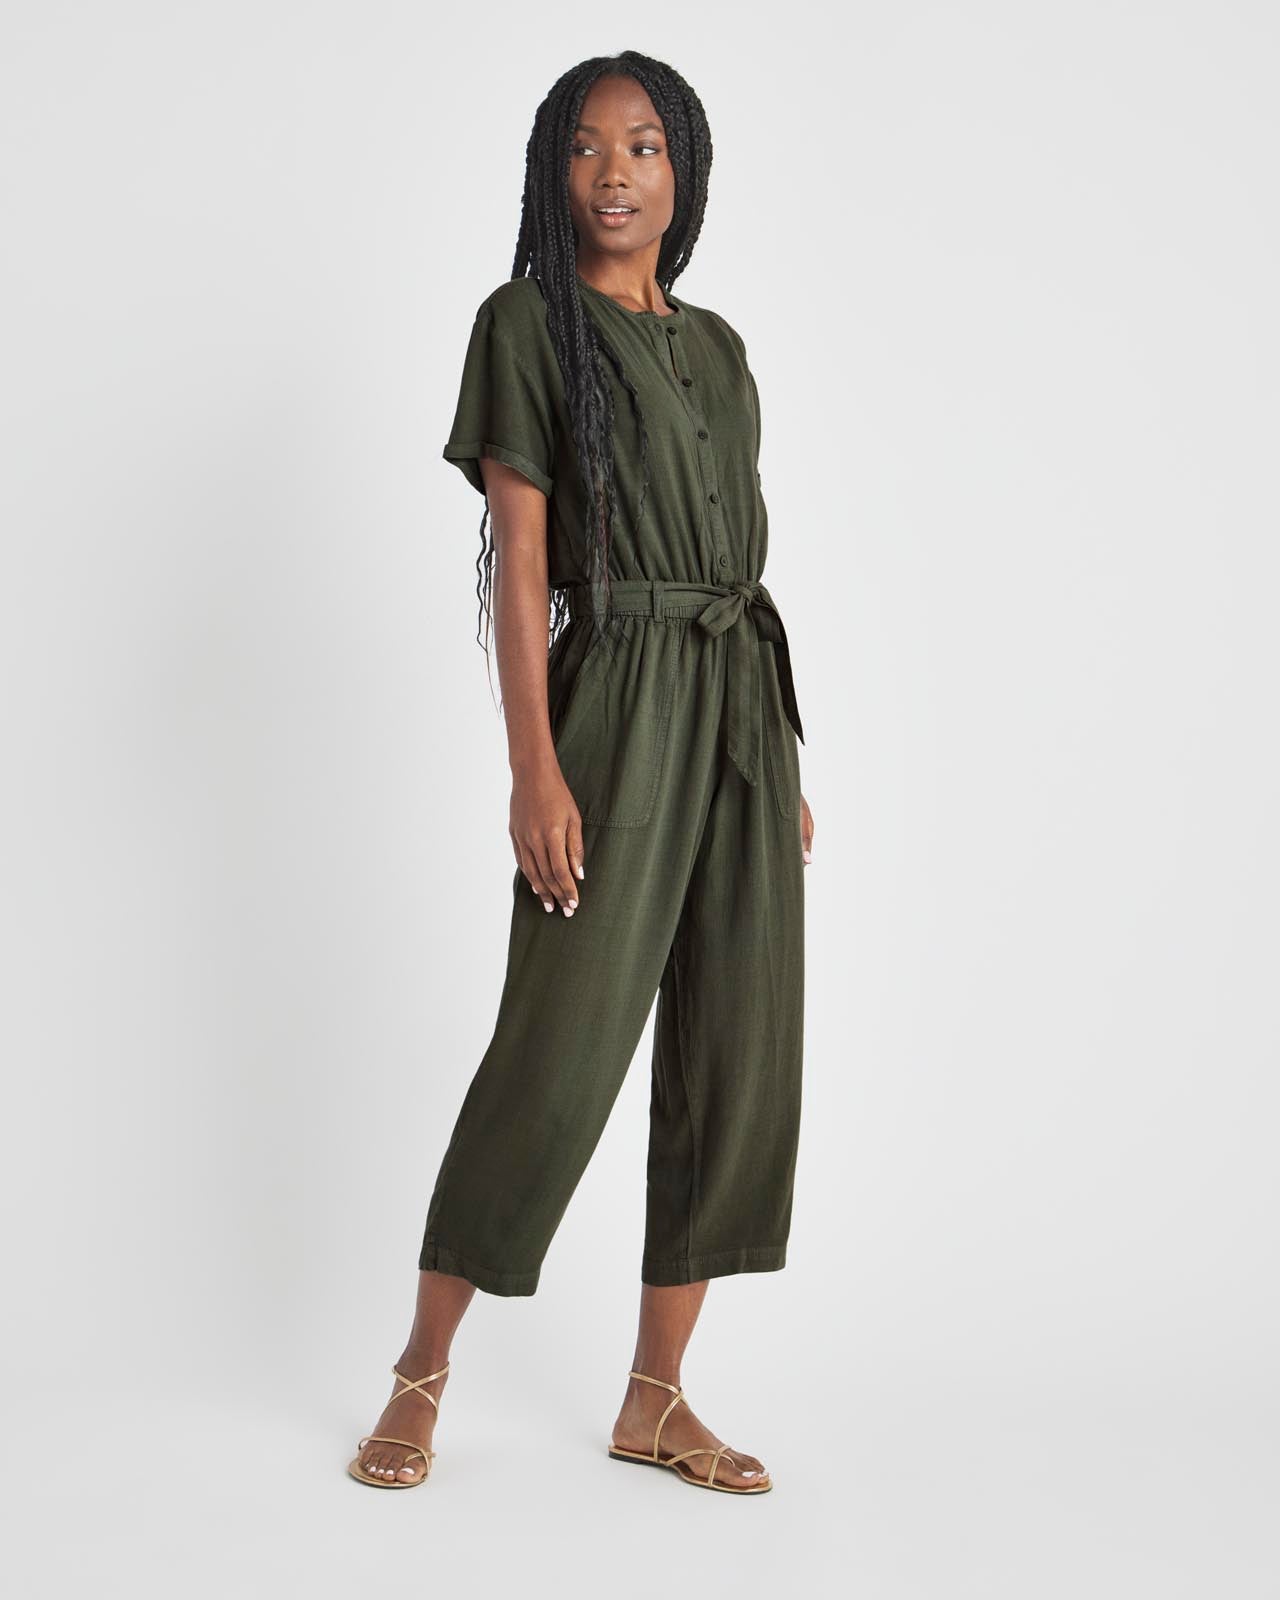 Jumpsuits & Rompers, Rompers for Women